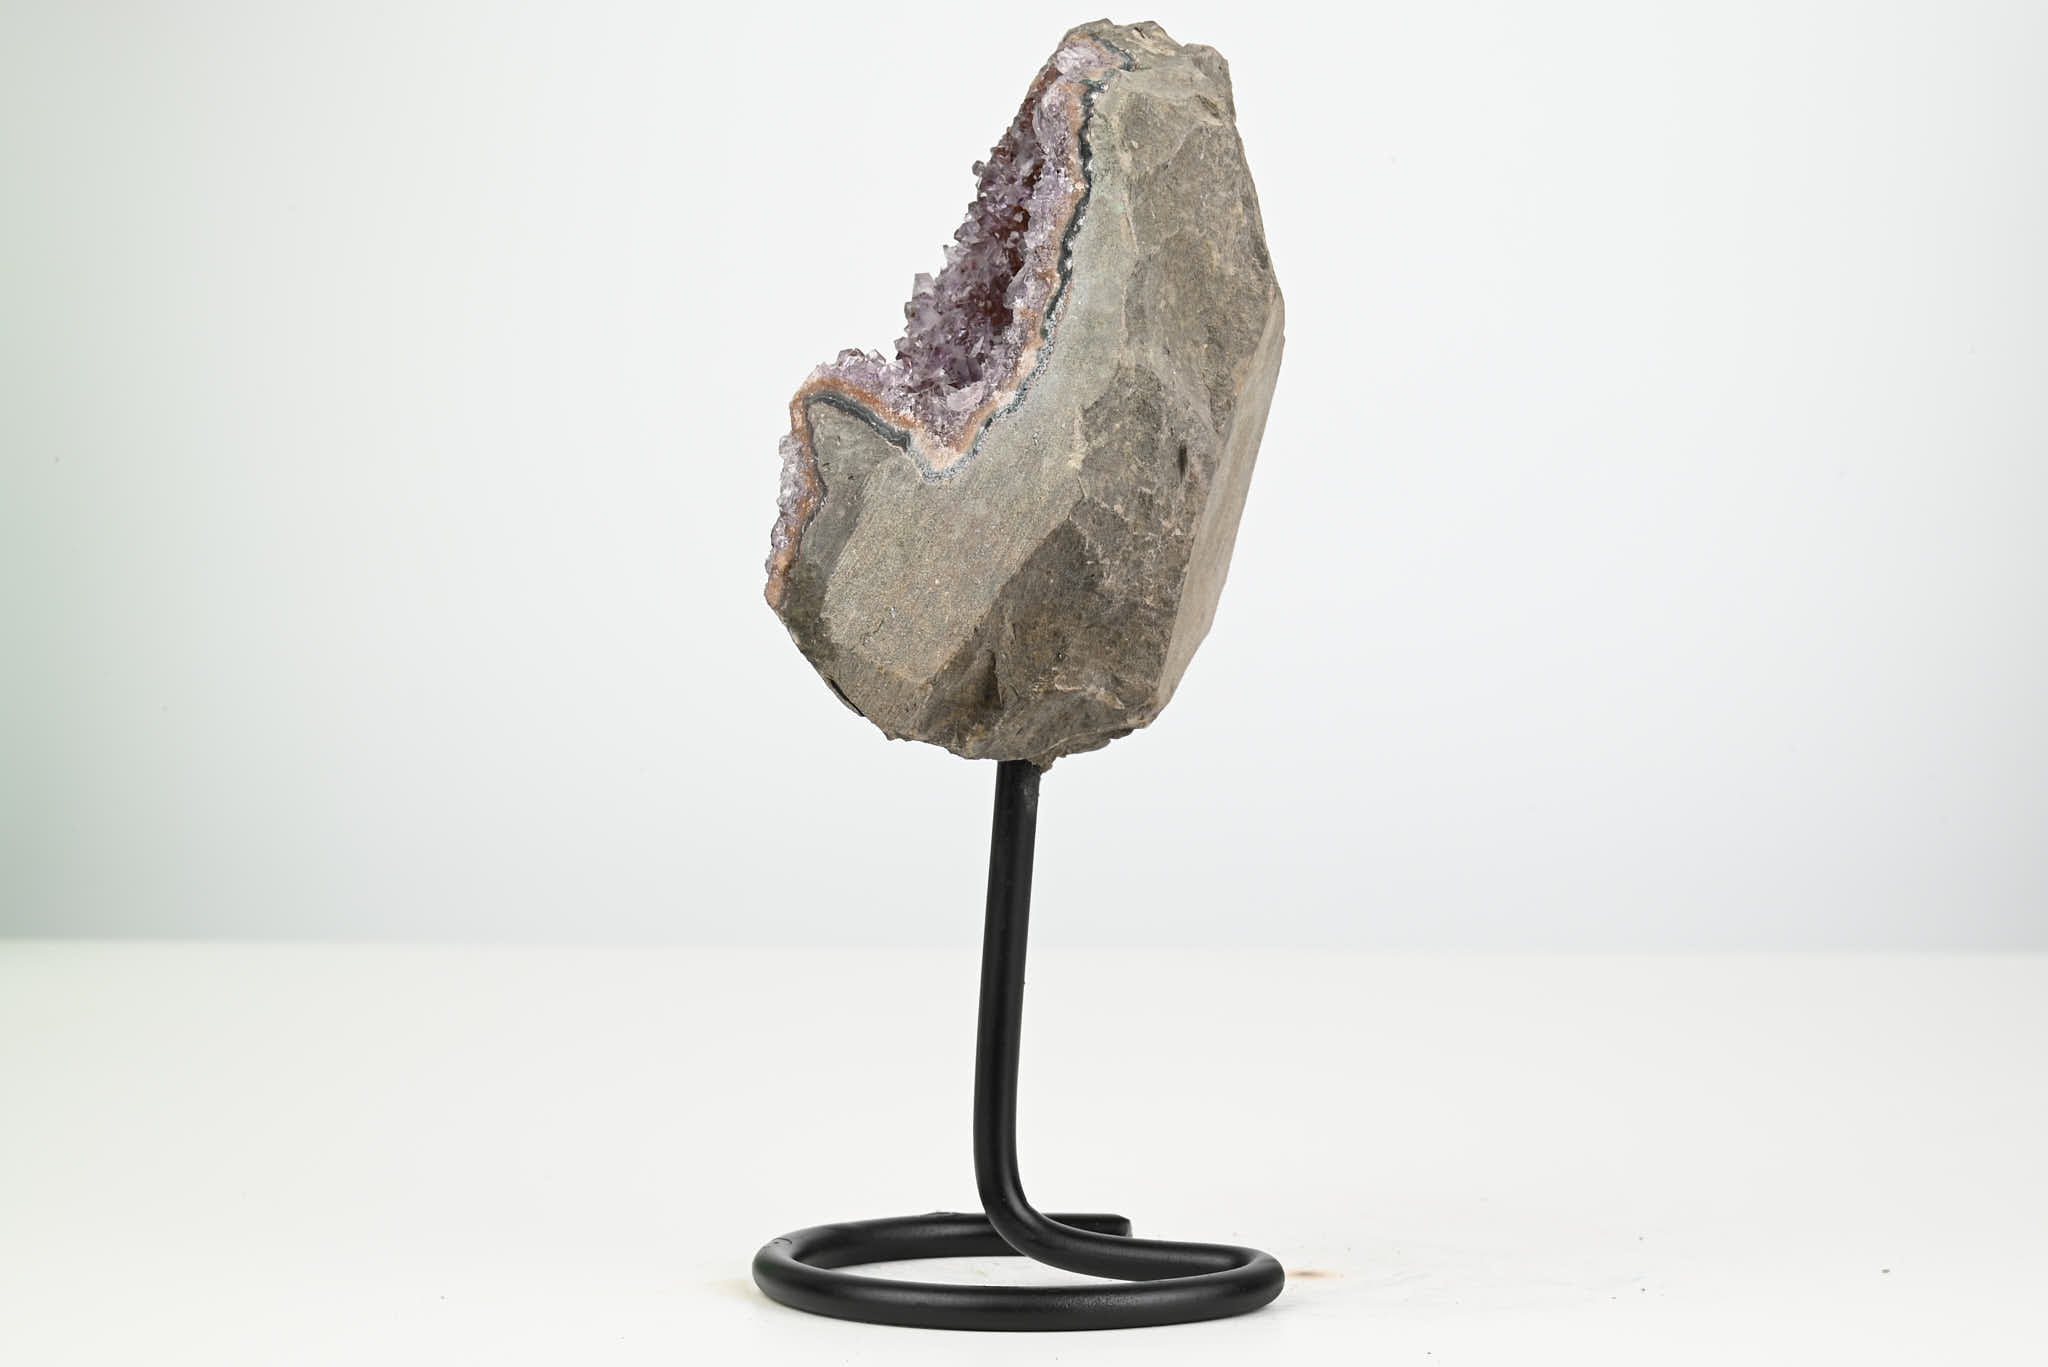 Amethyst Cluster on Stand - Small 16cm Tall - #CLUSAM-63032